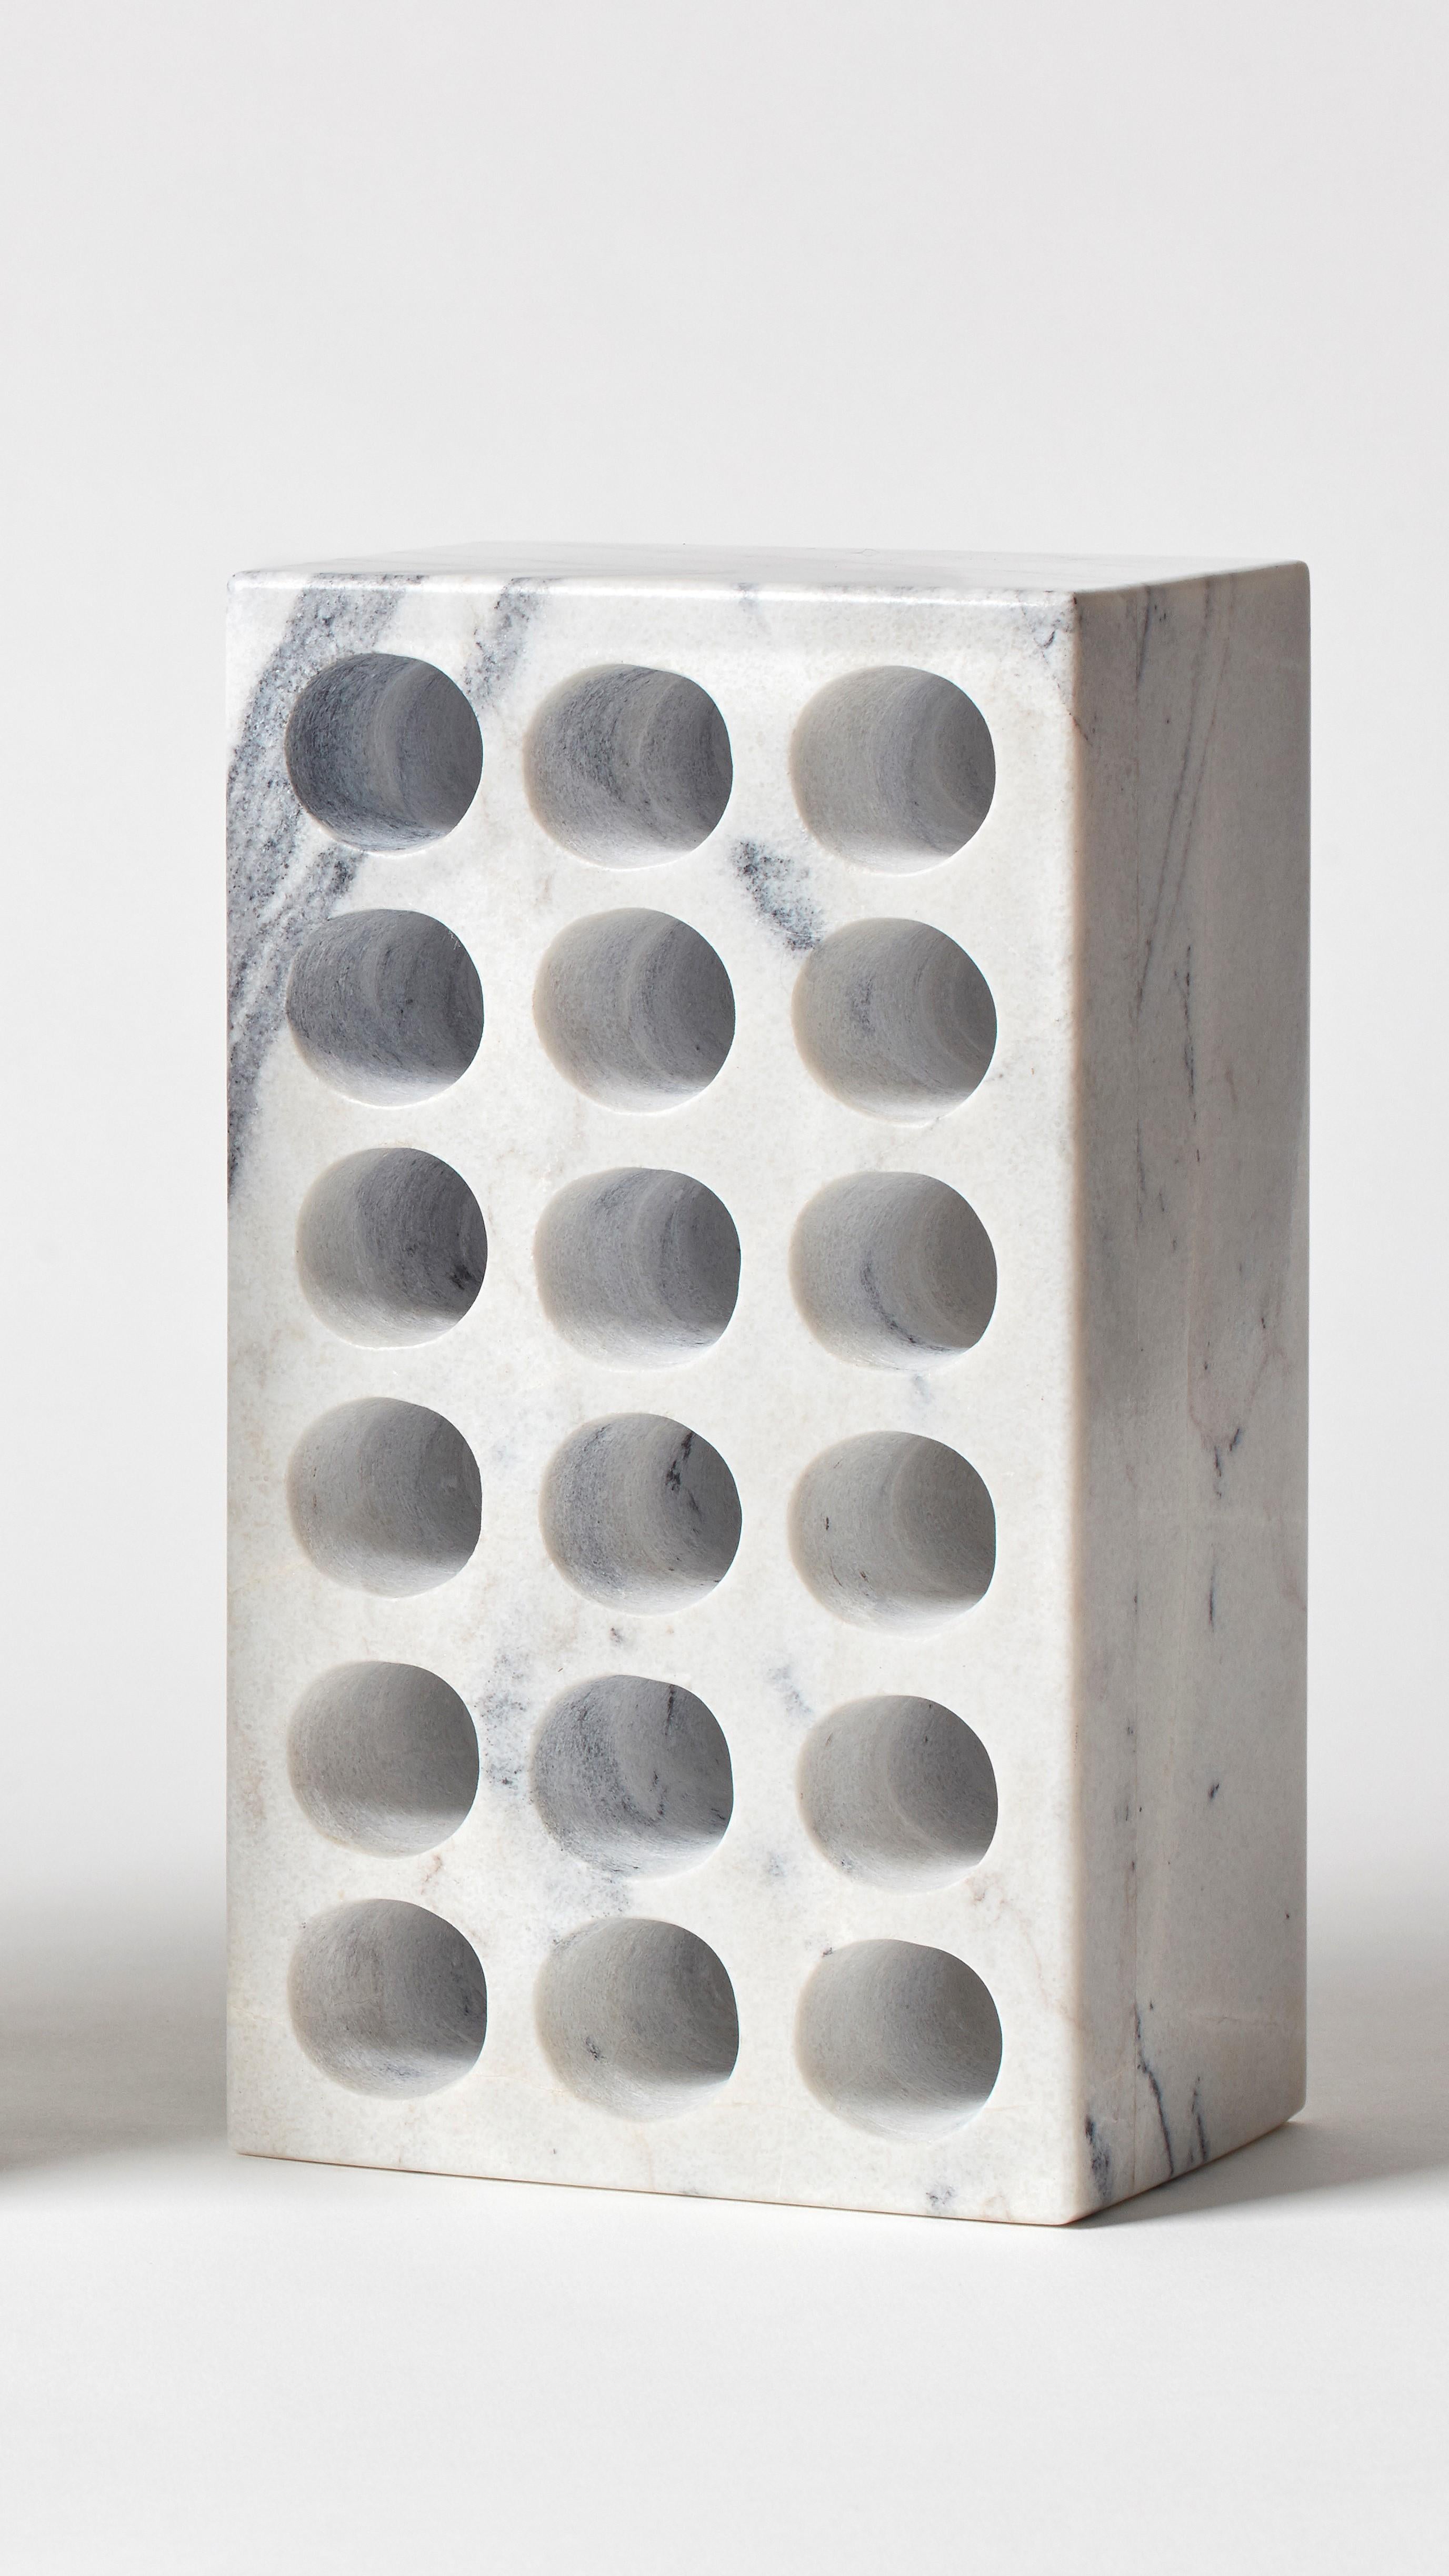 Brick by Estudio Rafael Freyre
Dimensions: W 12.5 D 9 x H 23 cm 
Materials: Andes Stones
Also available: other finishes available.

The brick is a generic constructive element that constitutes part of the urban imaginary. In Peru, moreover, its